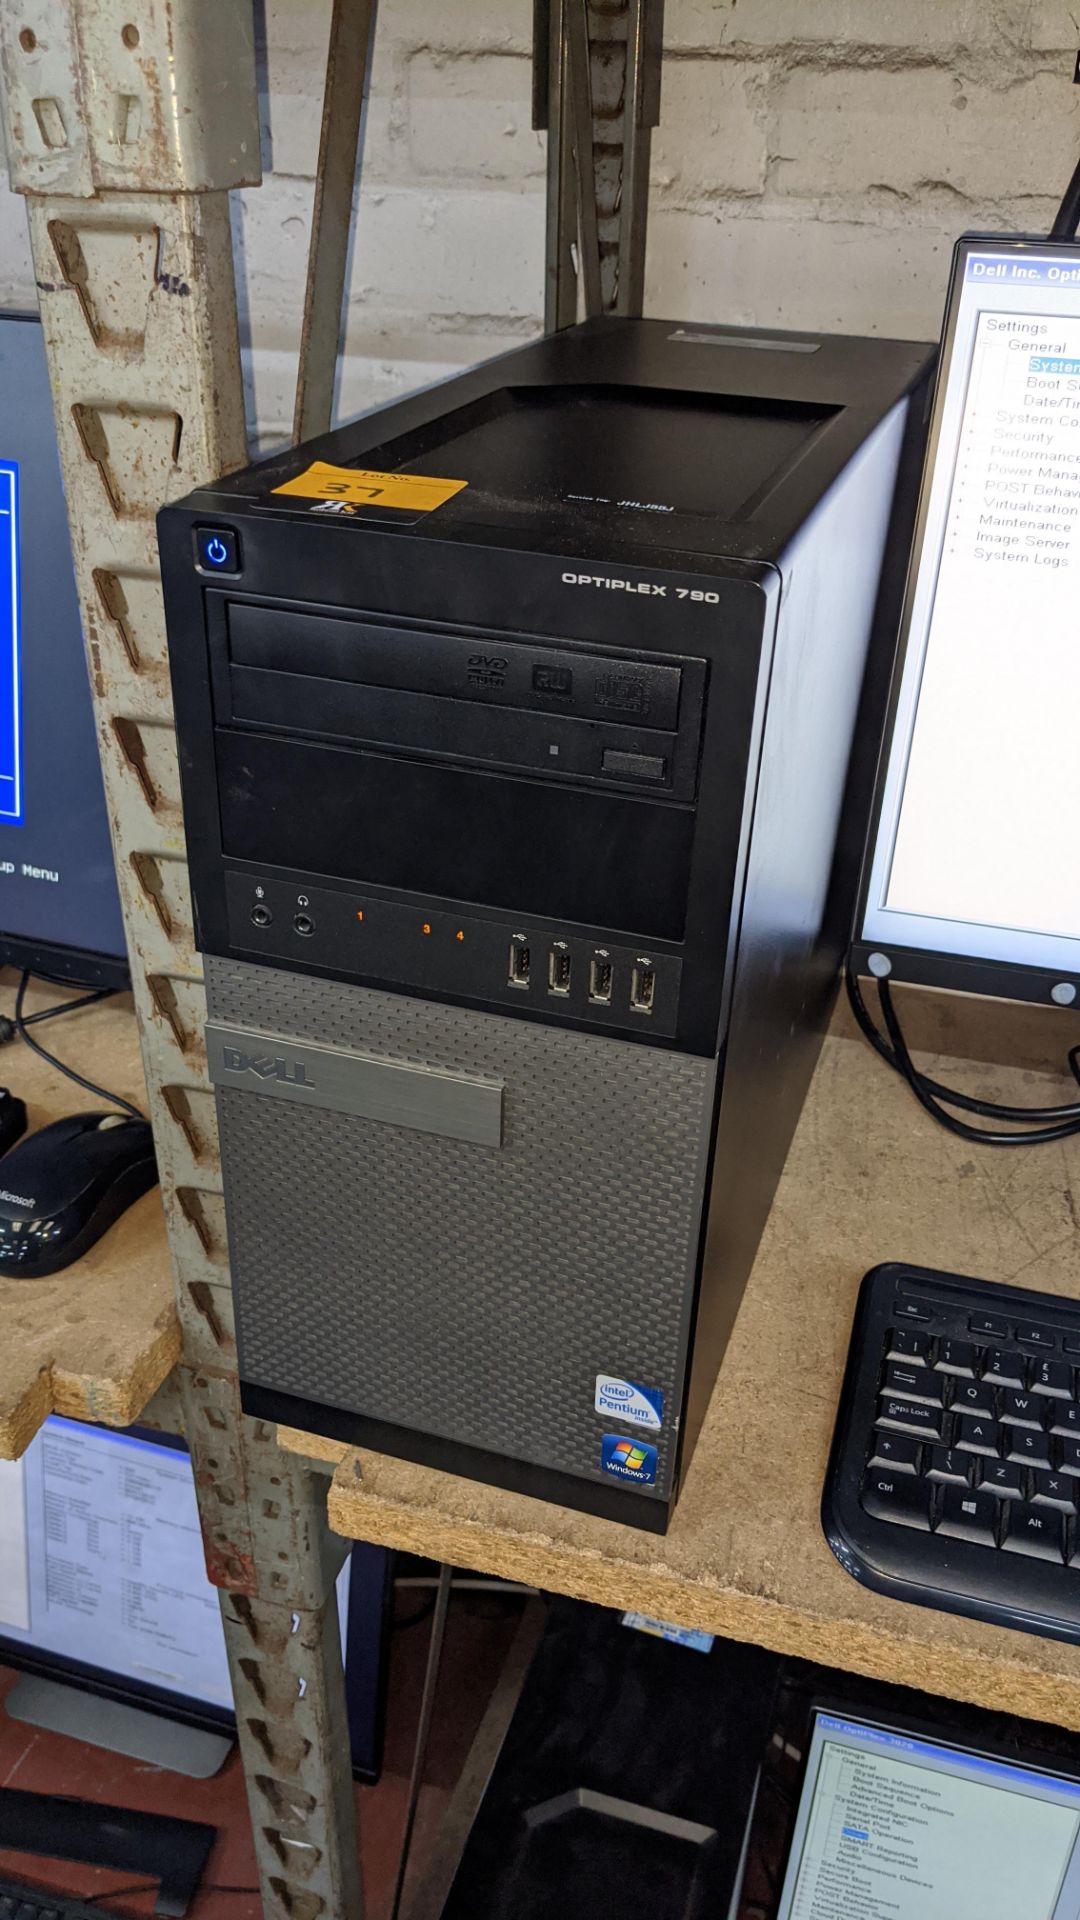 Dell Optiplex 790 computer with Intel Pentium G620 processor, 2Gb RAM, twin 250Gb HDD etc. includes - Image 3 of 5